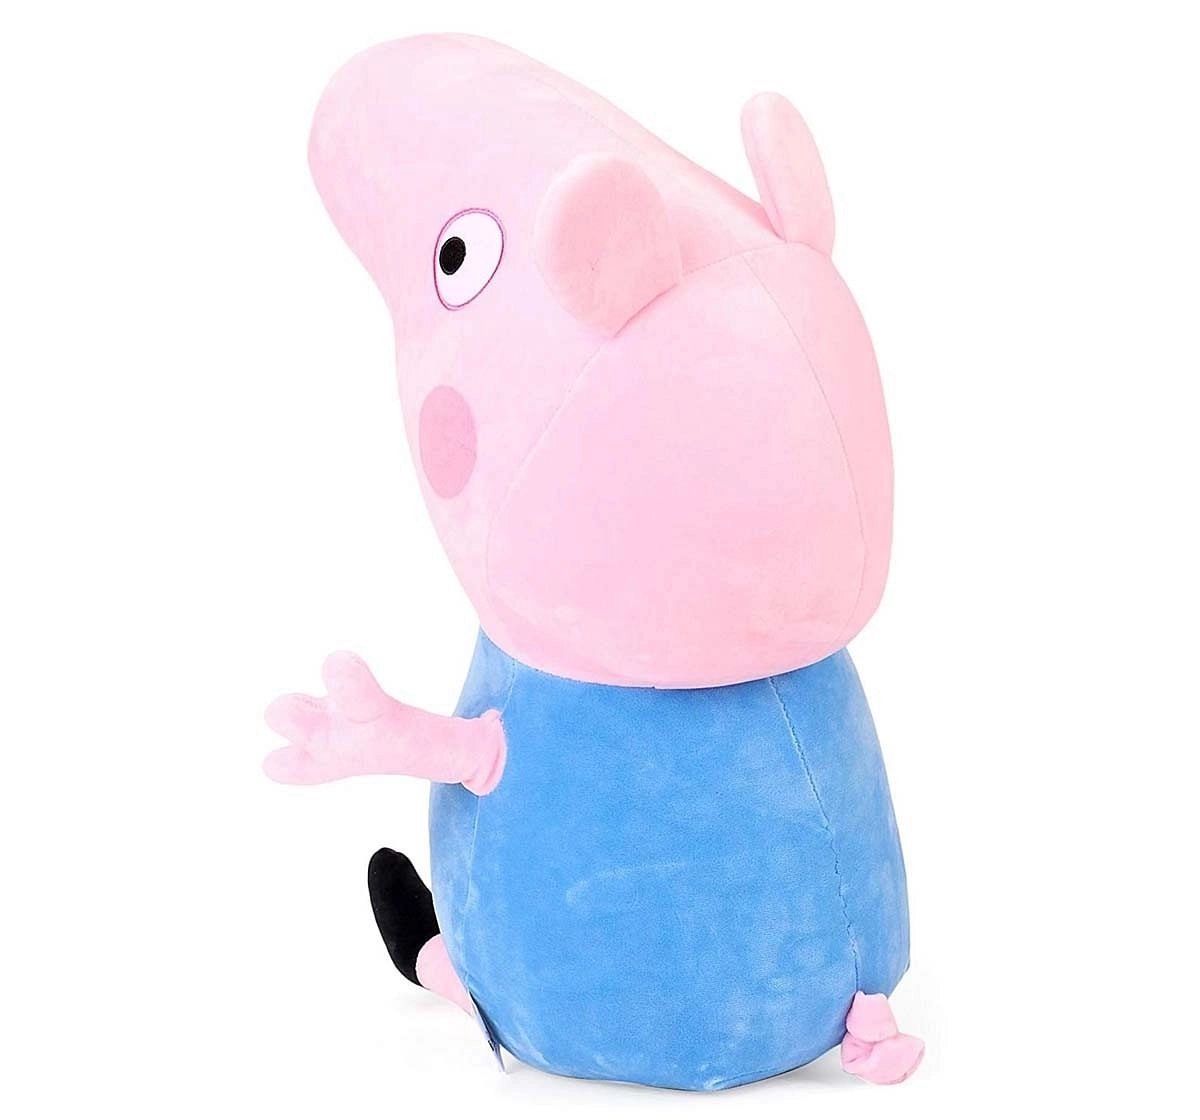 Peppa Pig George Pink and Blue Plush Hypoallergenic Cute Character Soft Toys For Kids age 0M+ 6 Cm 